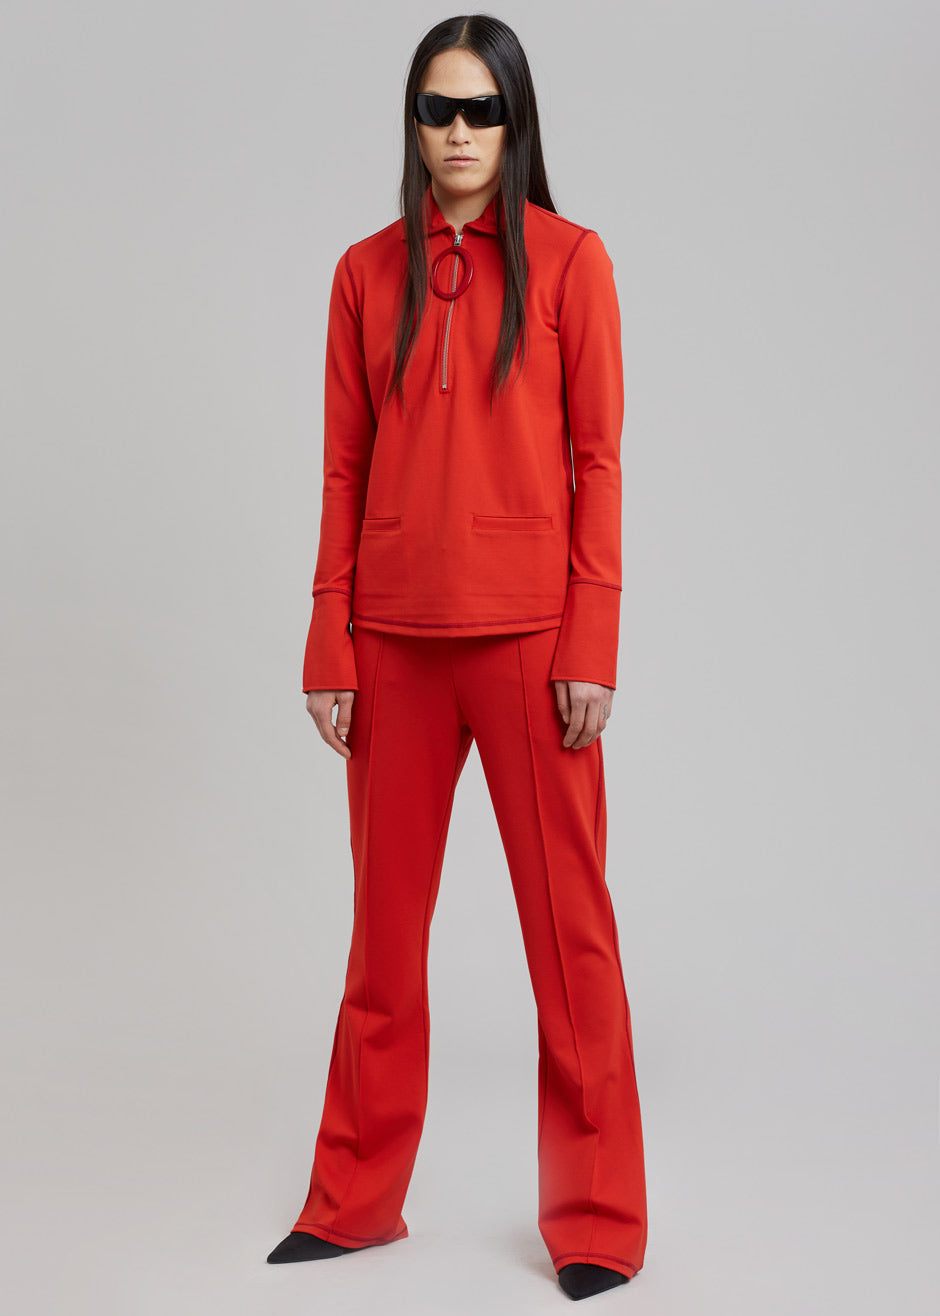 JW Anderson Ring Puller Half Zip Track Top - Red - 5